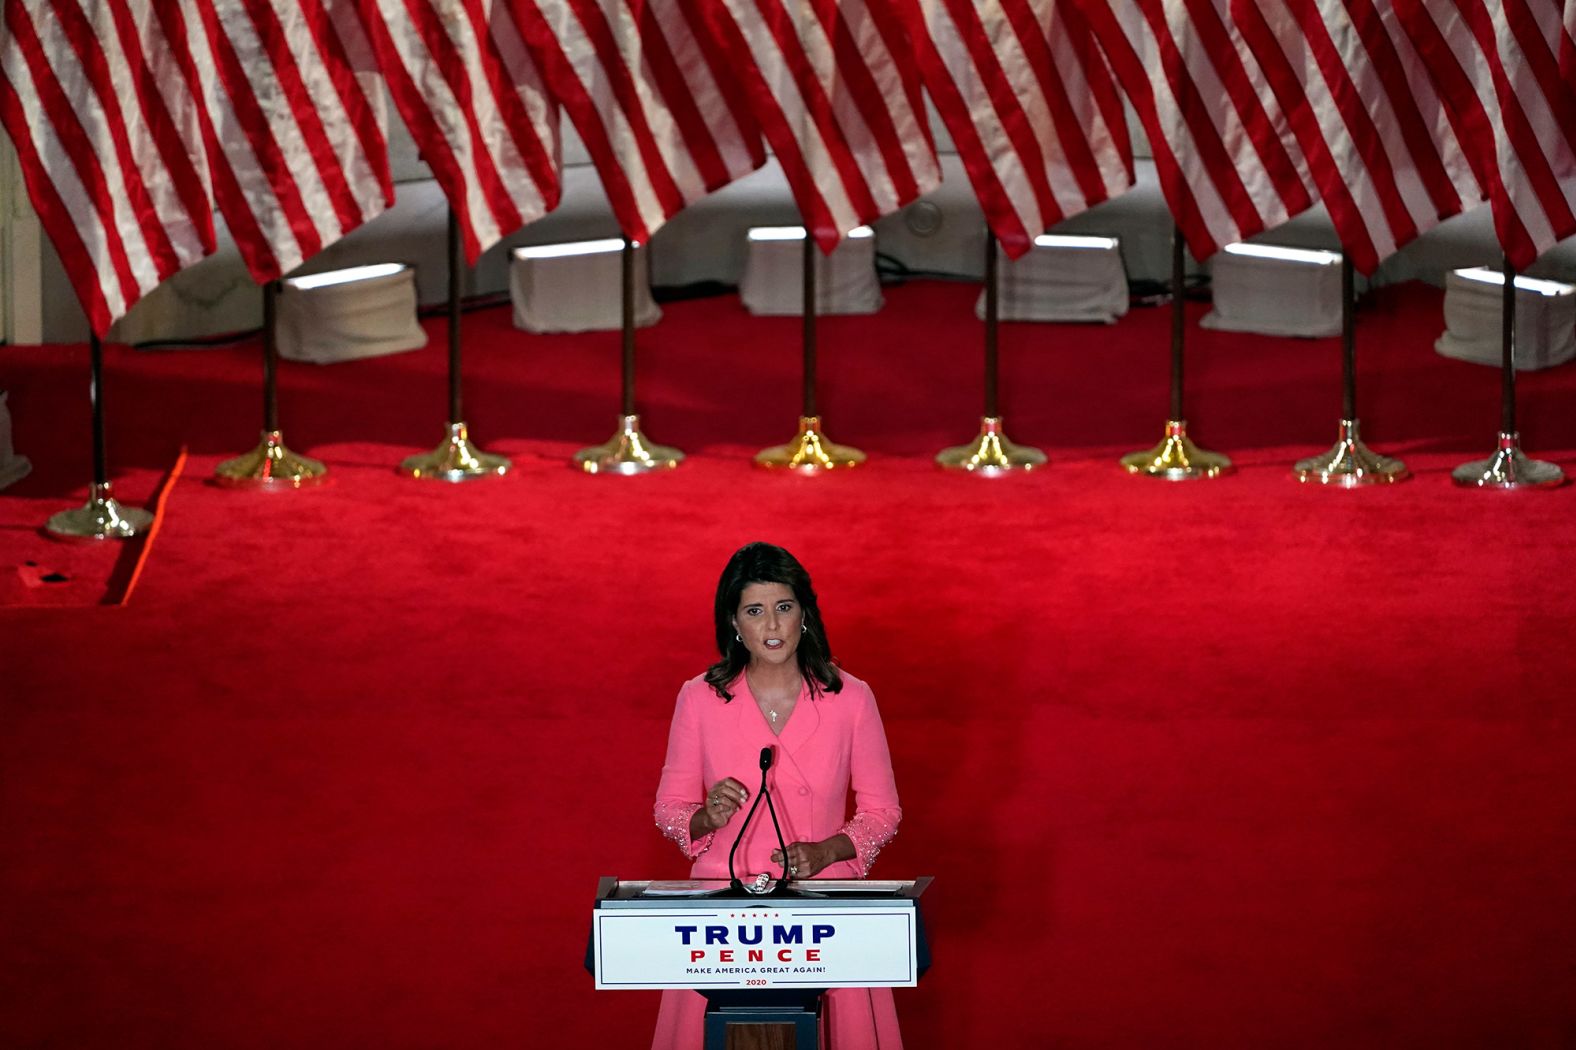 Former UN Ambassador Nikki Haley gives a prime-time speech Monday. <a href="index.php?page=&url=https%3A%2F%2Fwww.cnn.com%2Fpolitics%2Flive-news%2Frnc-2020-day-1%2Fh_e55c6399af1fc20d68c3f35d924b01fe" target="_blank">Haley sought to demonstrate Trump's leadership around the world,</a> saying he has been tough against North Korea, Iran and China. She praised Trump for passing sanctions on North Korea and said he "ripped up the Iran nuclear deal."